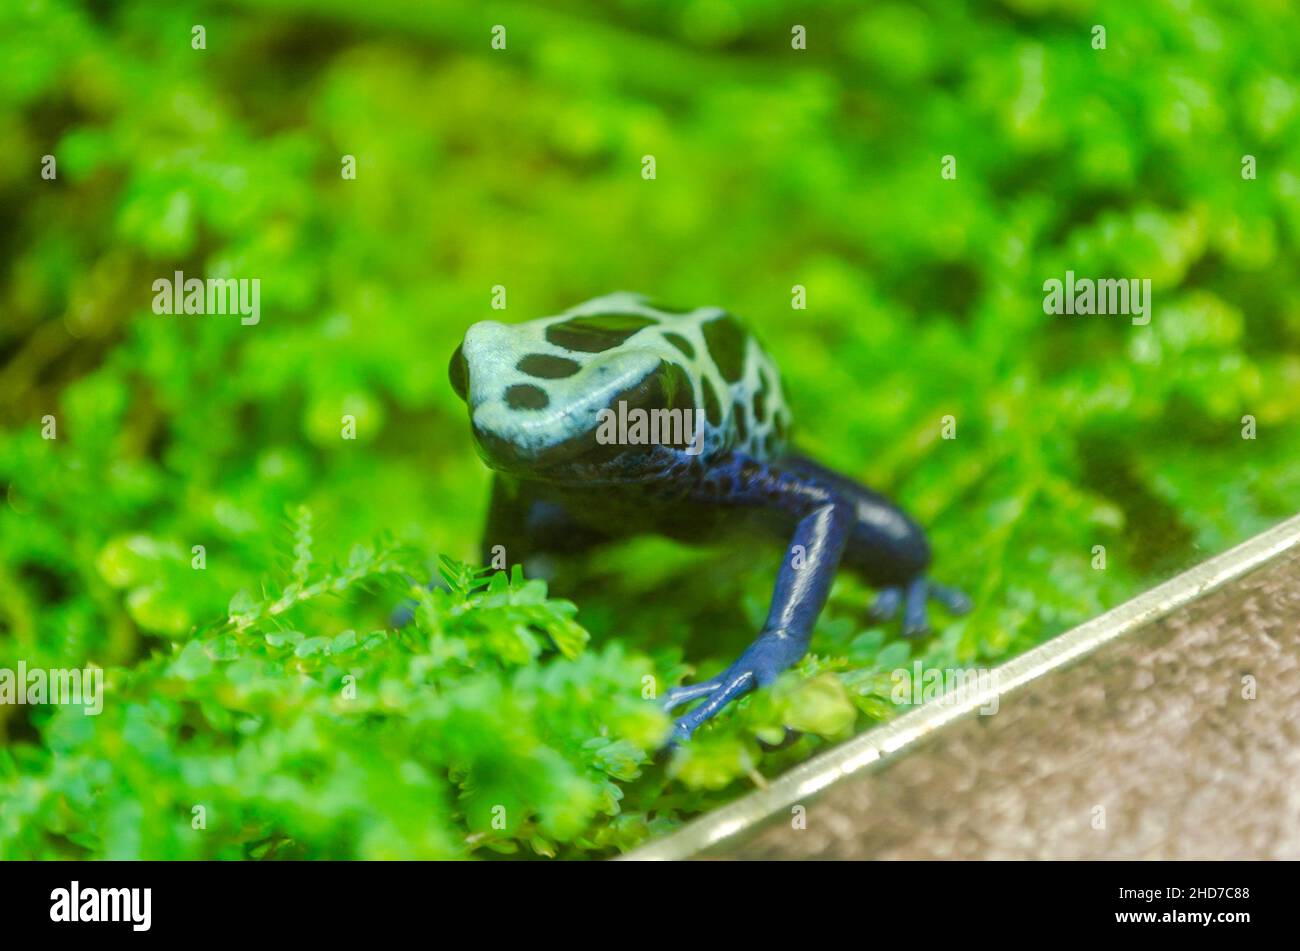 Blue Tropical Poison Dart Frog Sitting on Green Leaves. Natural Environment. Wildlife Photography. Stock Photo